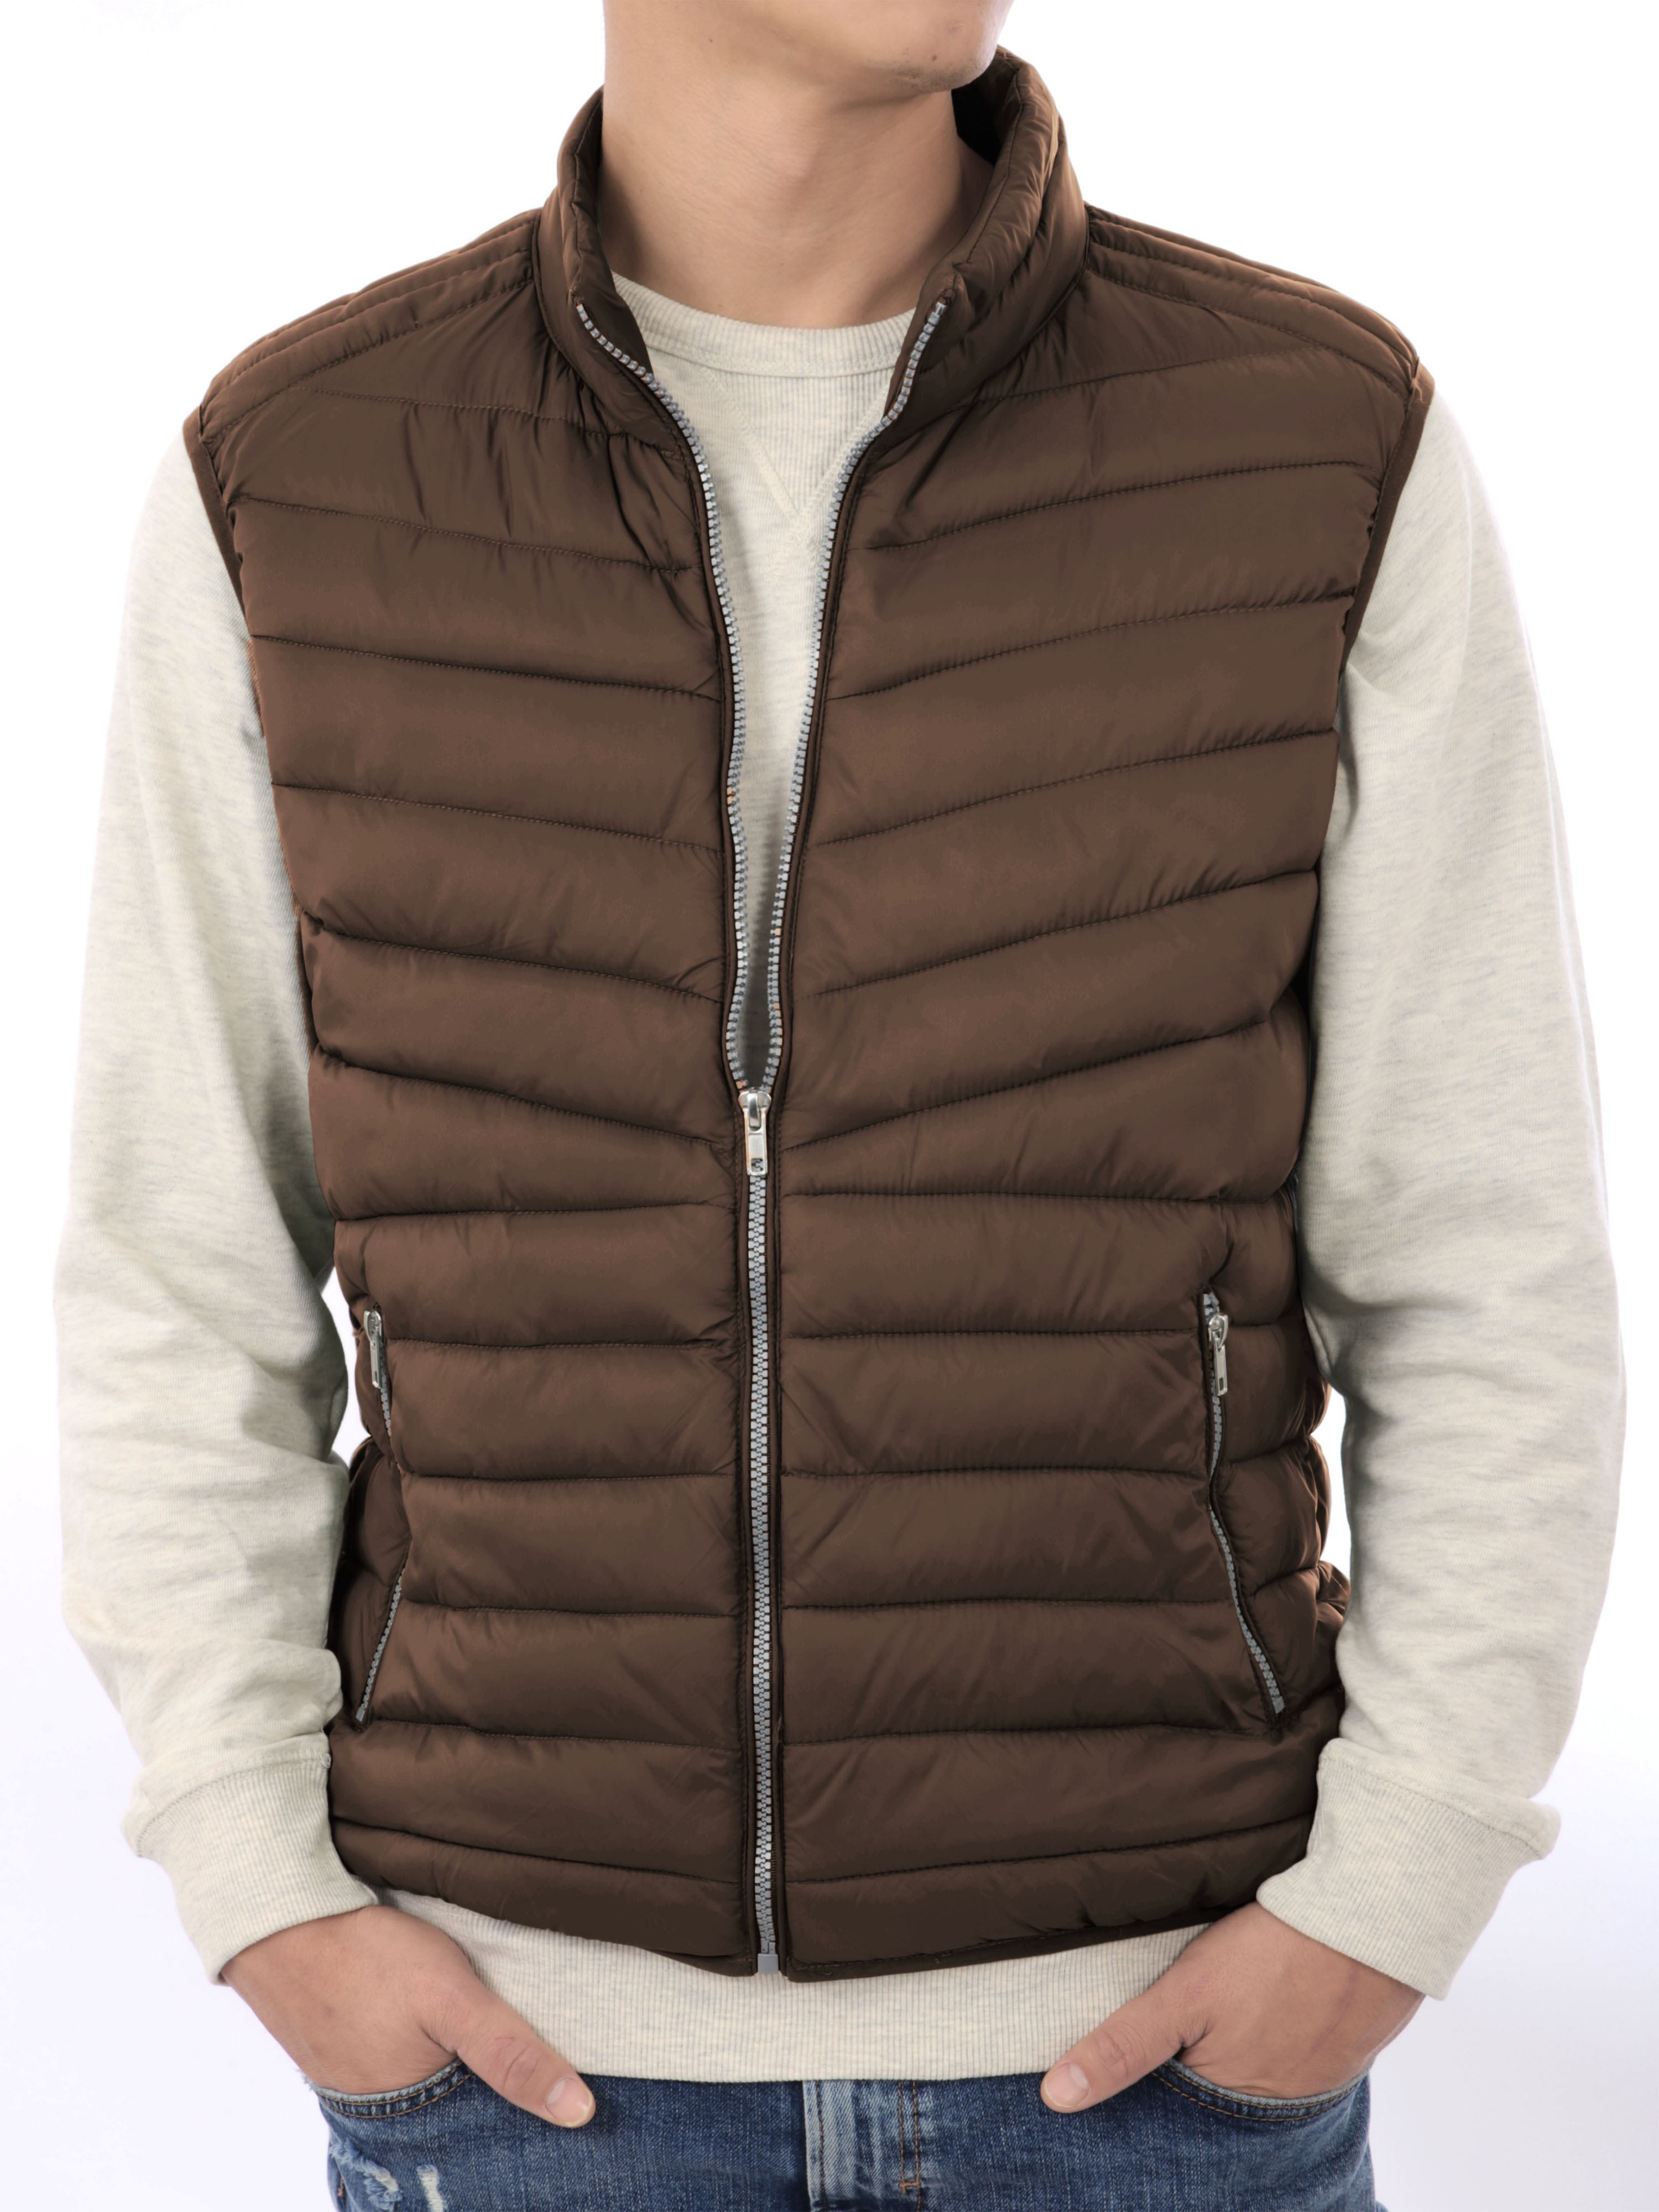 Ma Croix Mens Ultra Light Puffer Down Vest Polyester Padded Packable All Season Vest - image 1 of 8